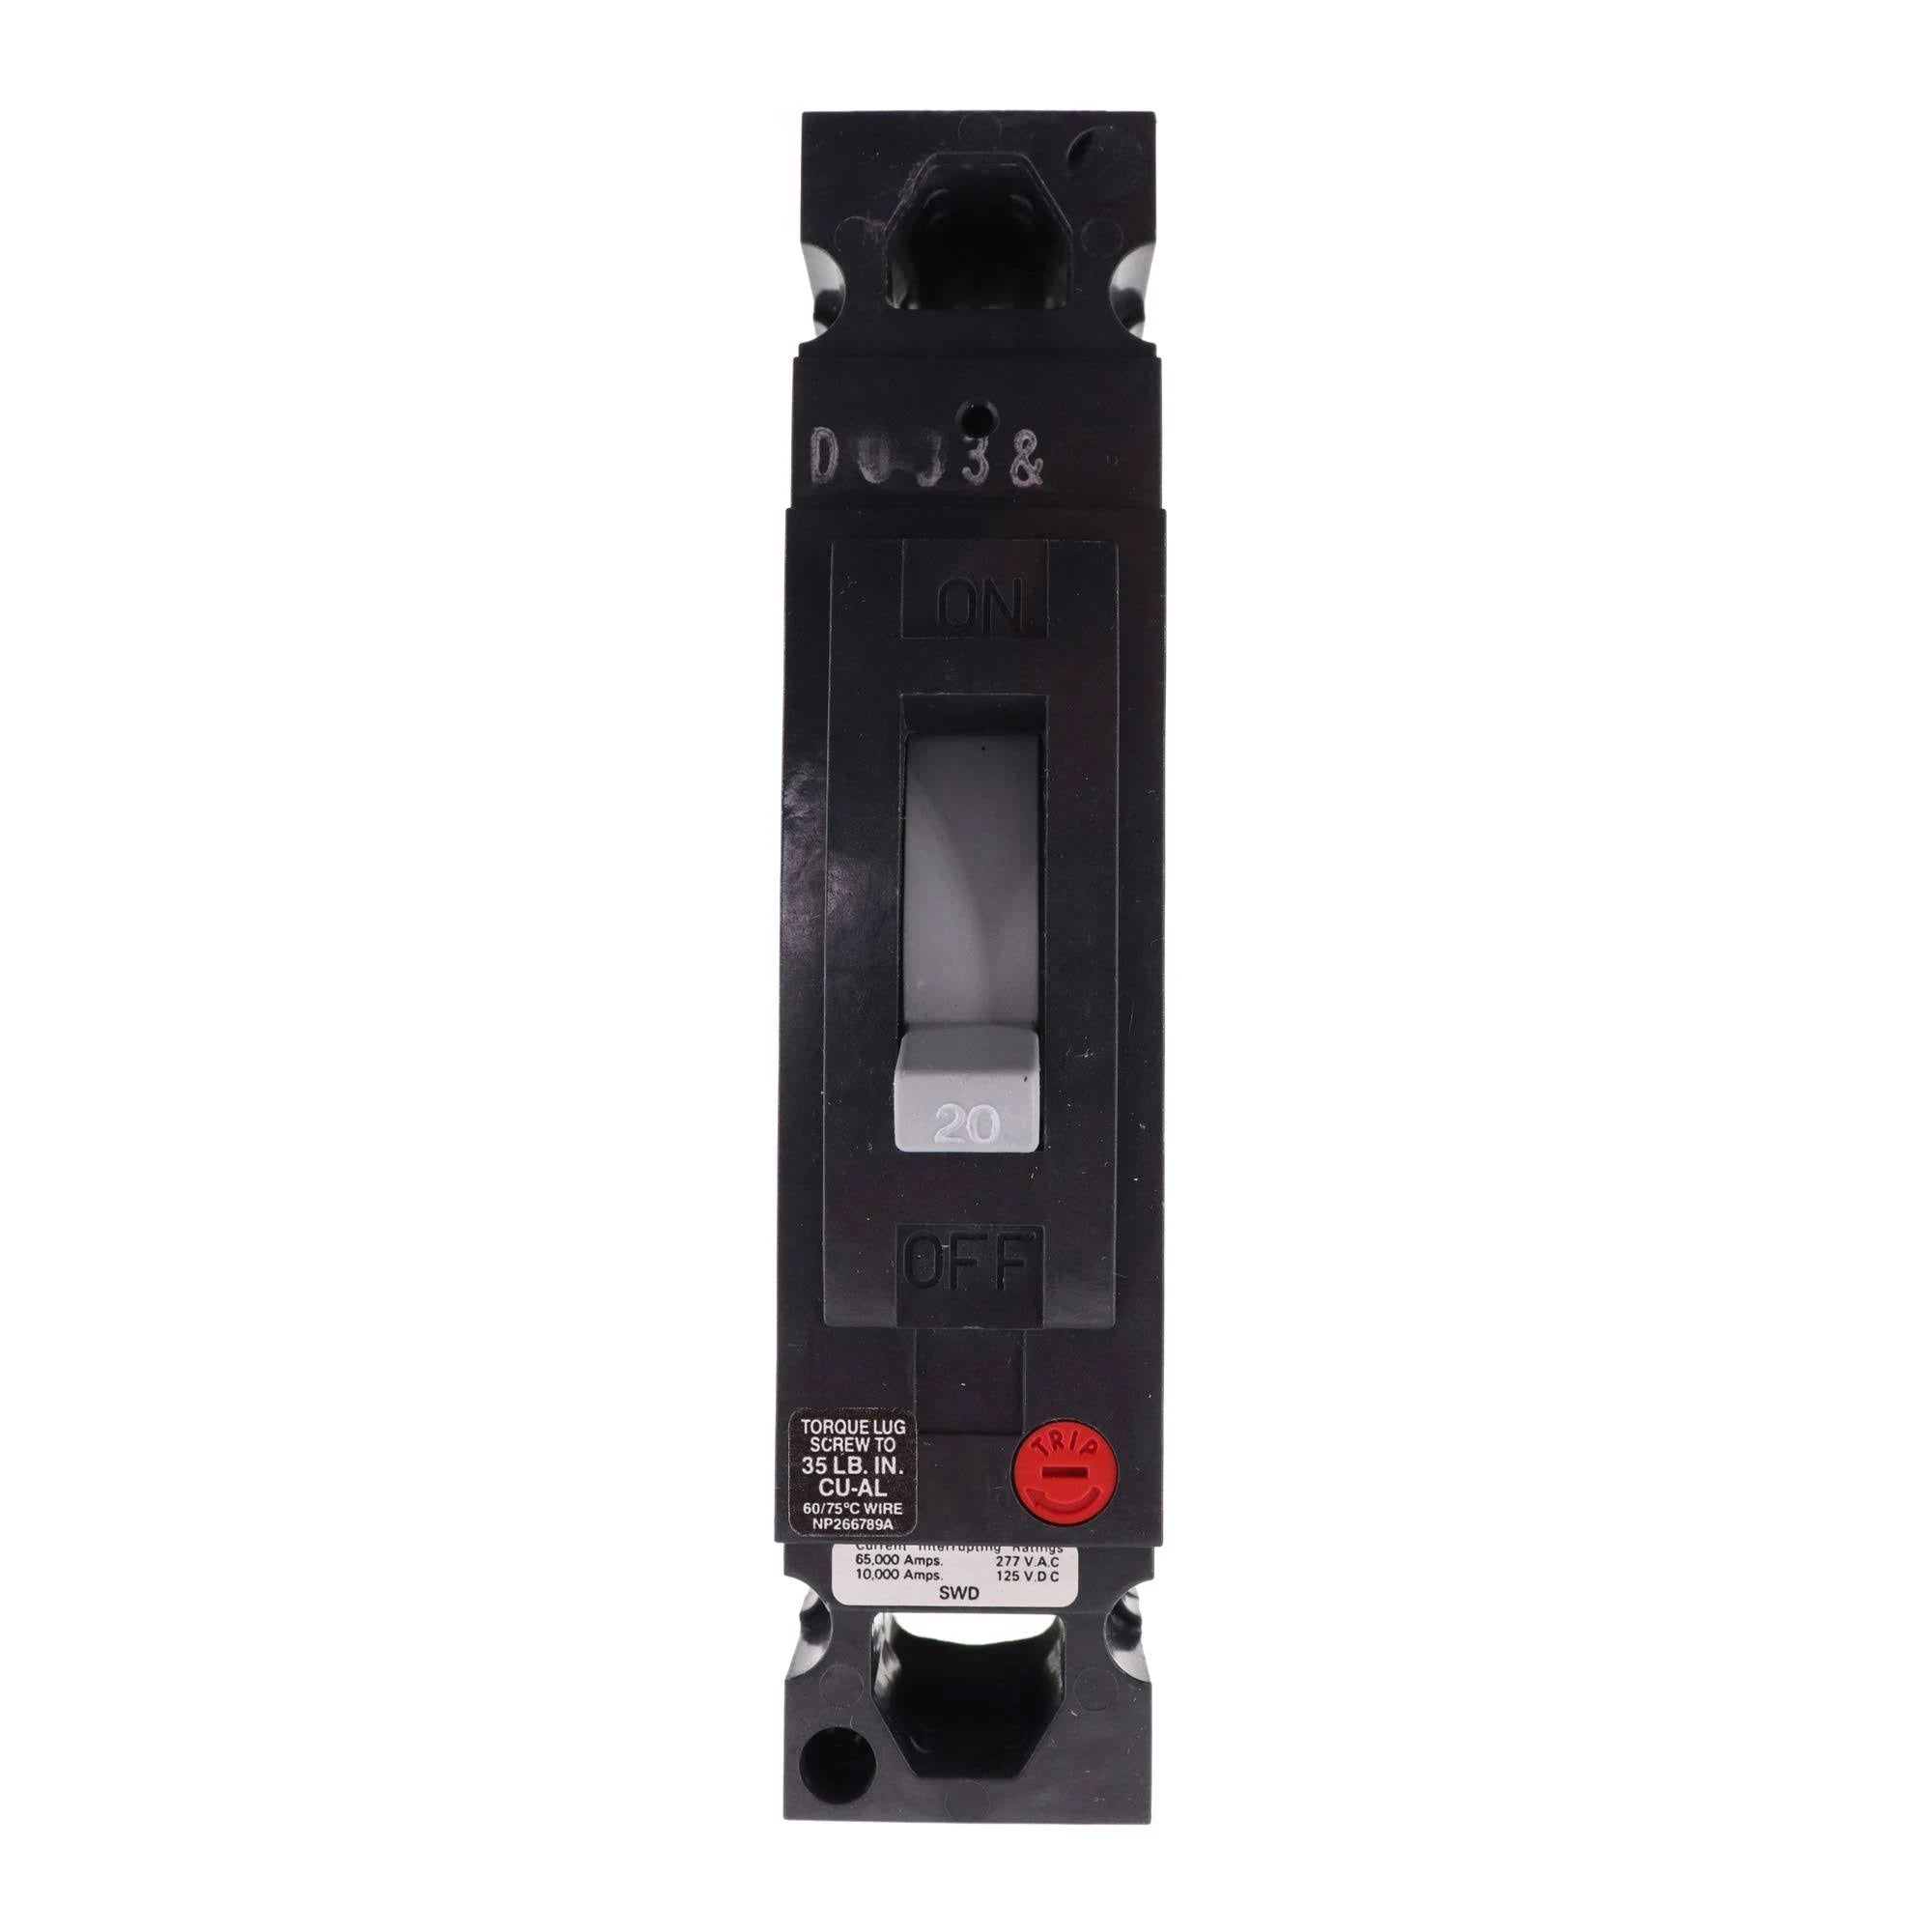 General Electric THED113020 1 Pole Circuit Breaker, Refurbished